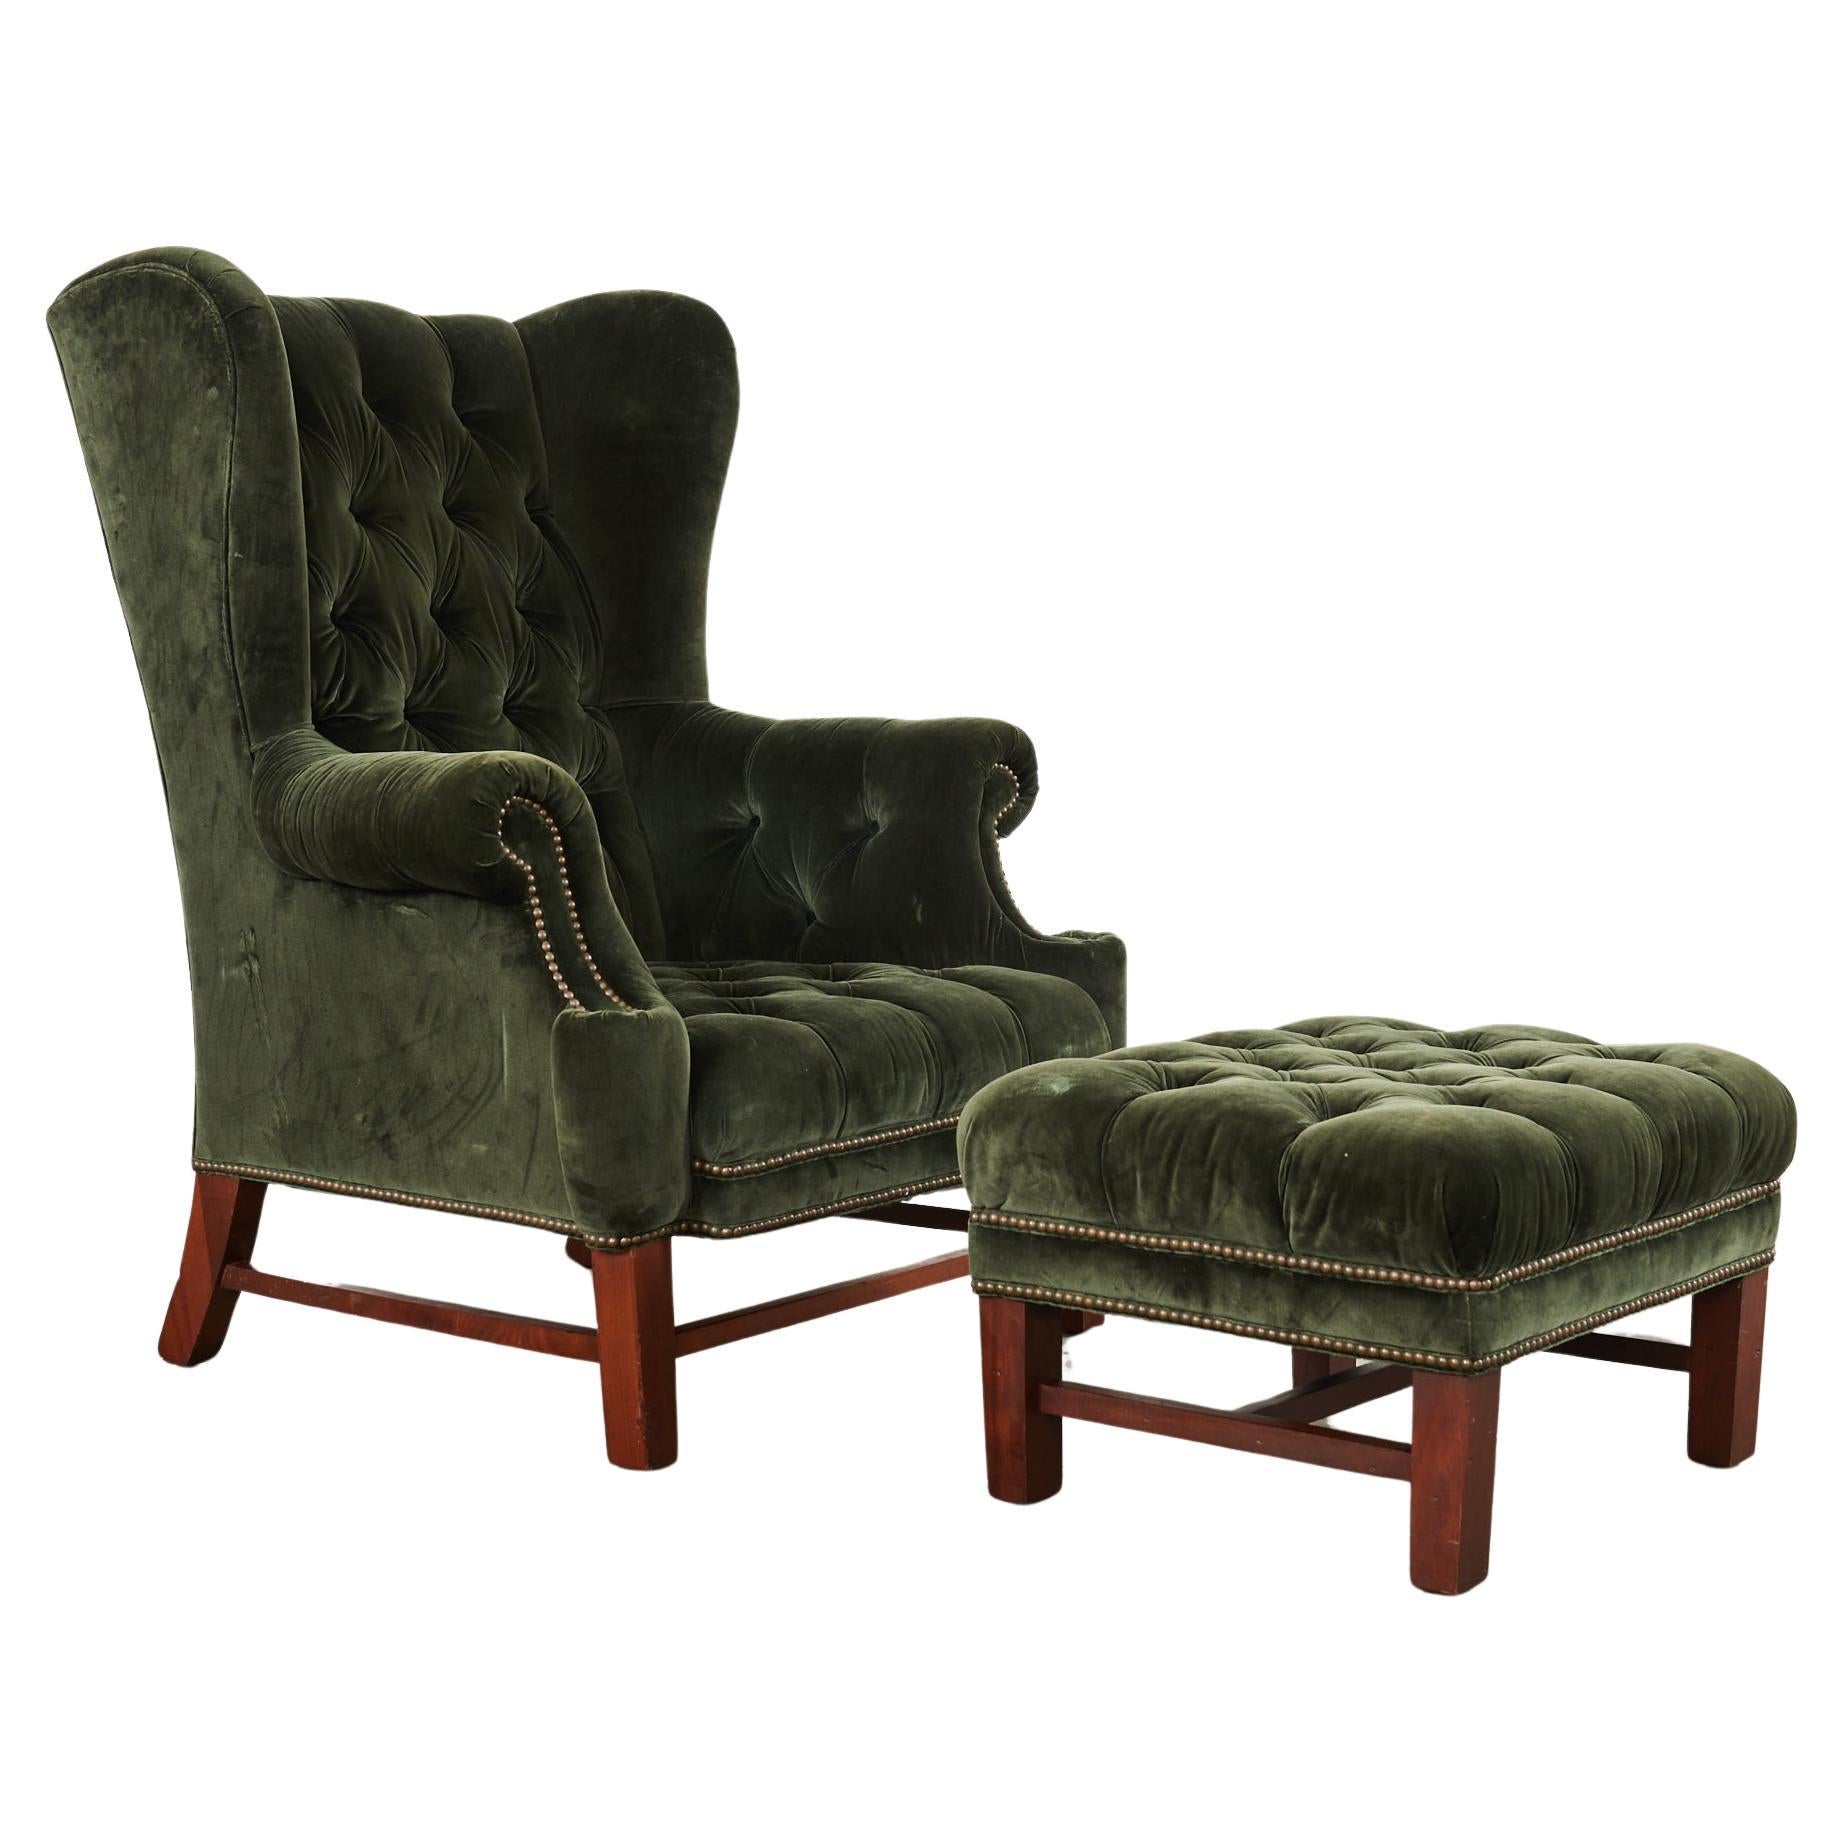 Ralph Lauren English Georgian Style Devonshire Wingback Chair and Ottoman For Sale